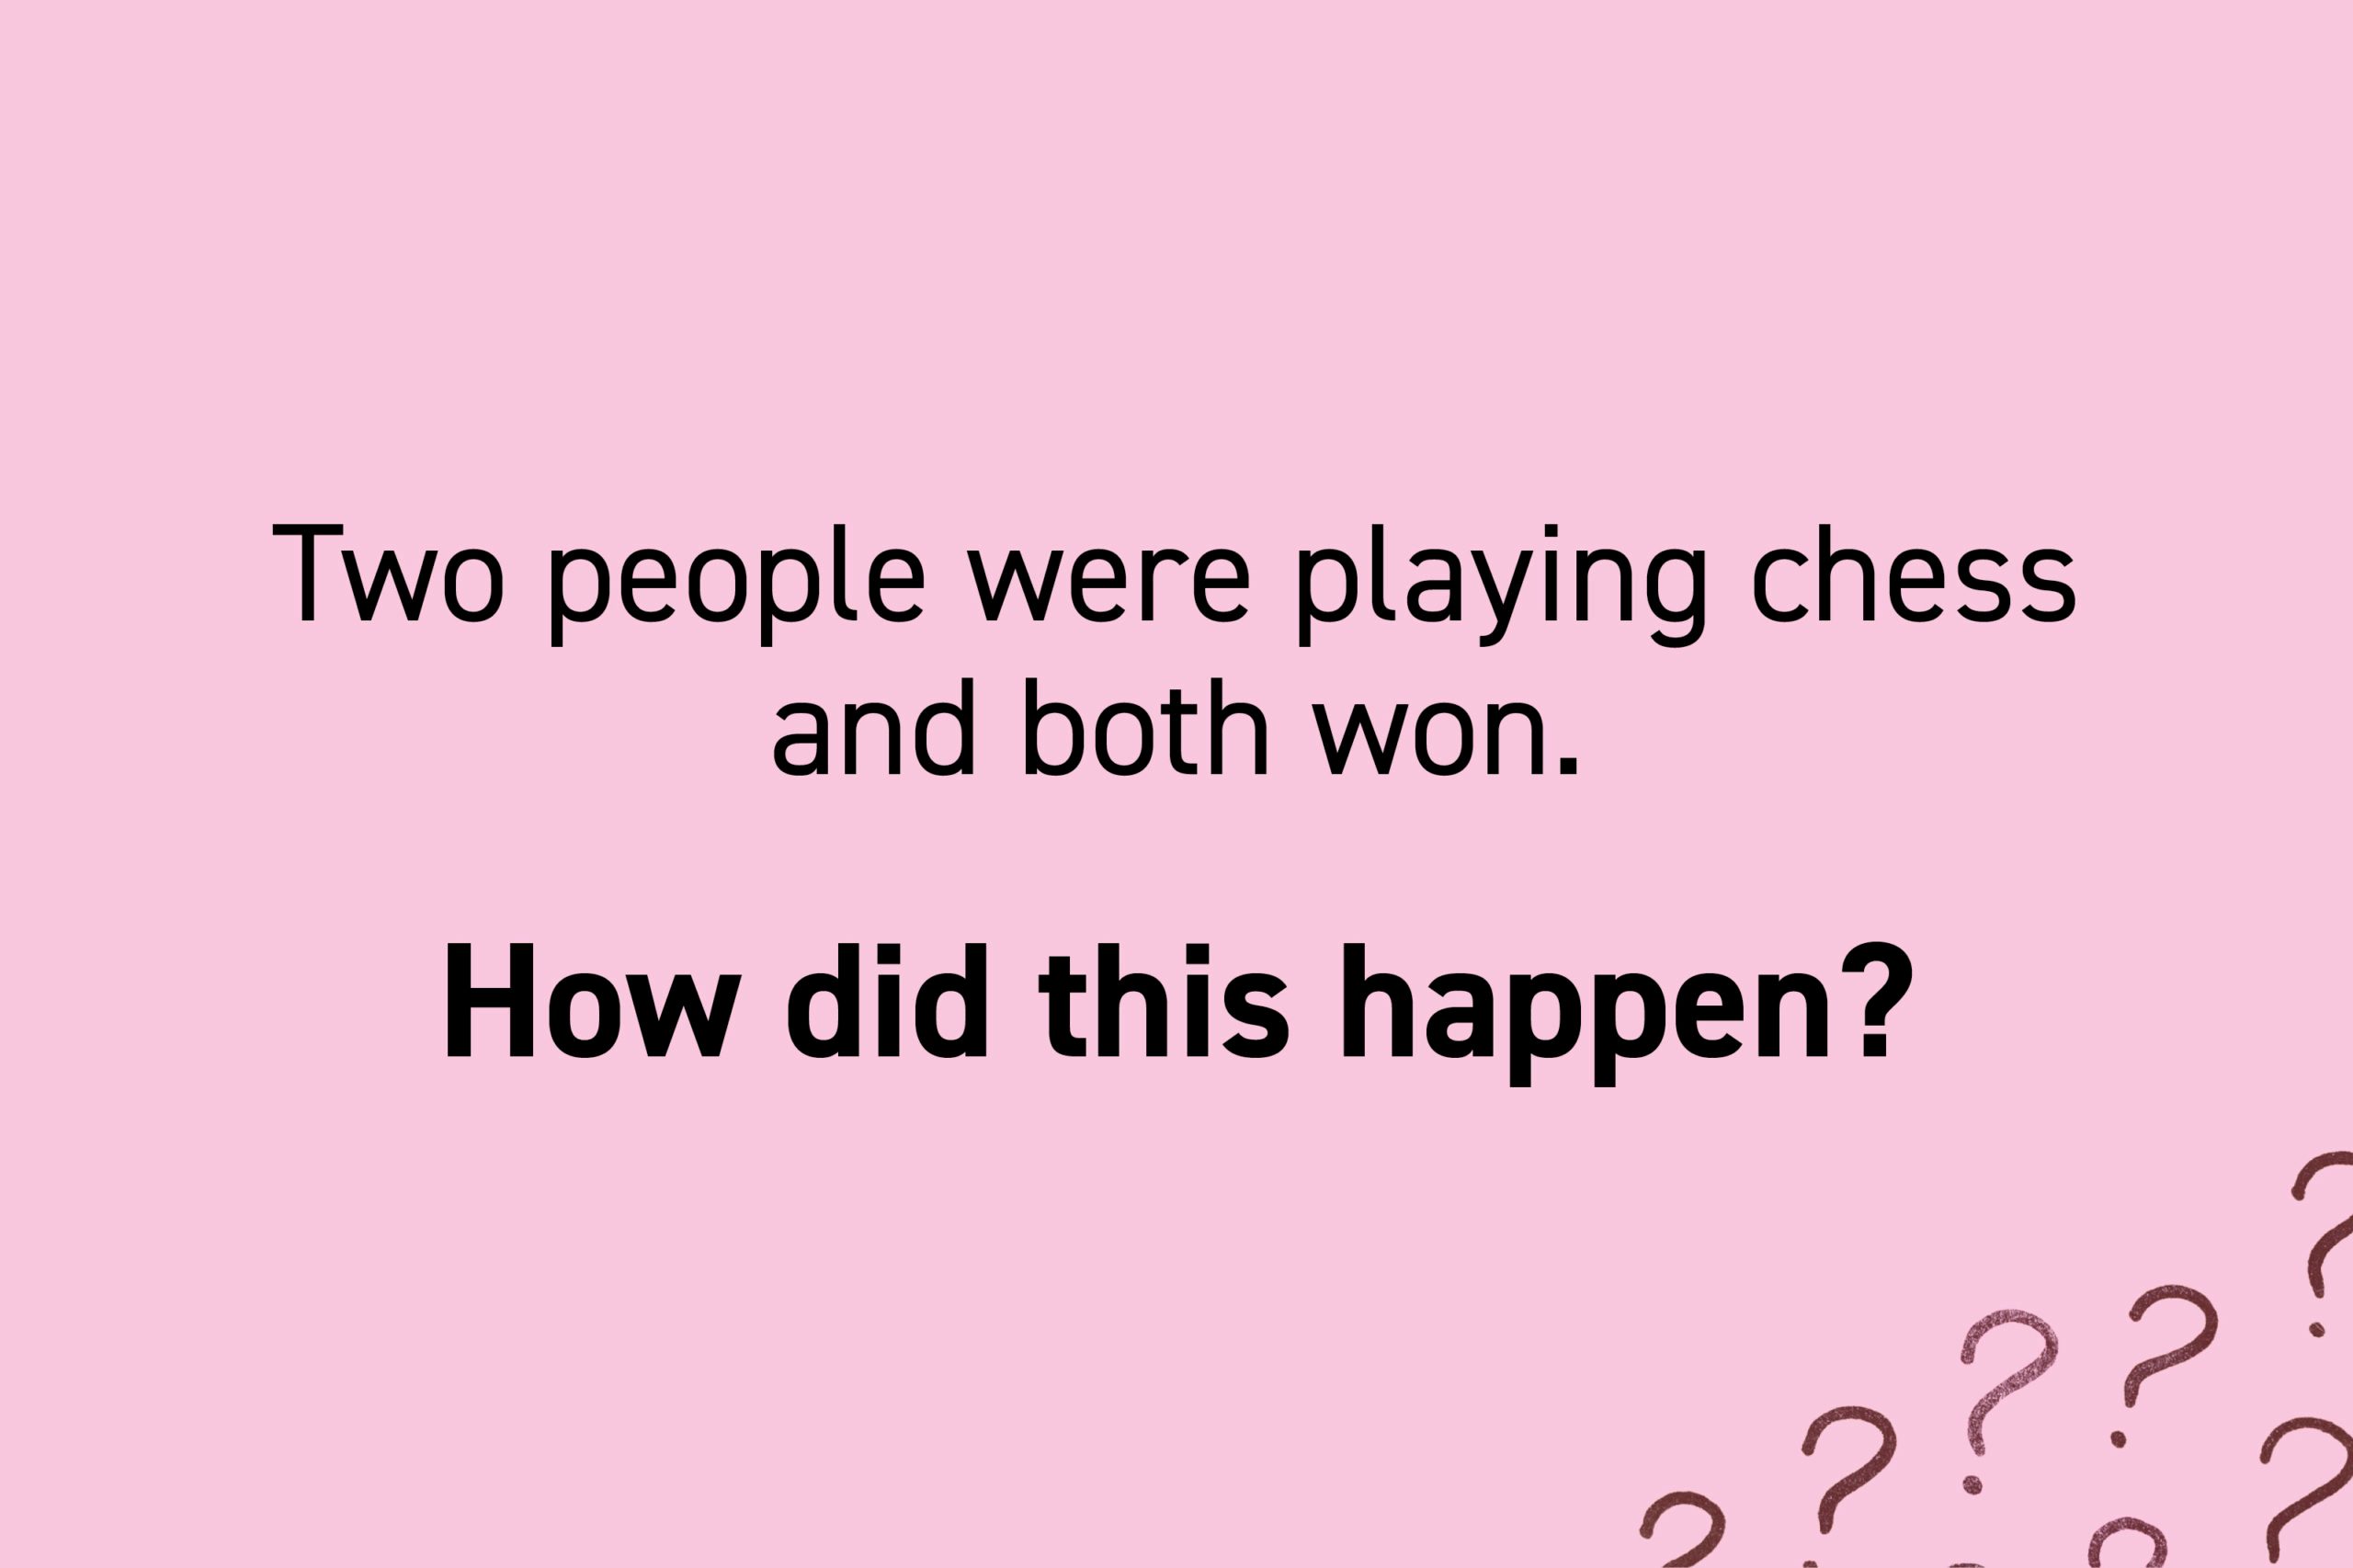 Two people were playing chess and both won. How did this happen?